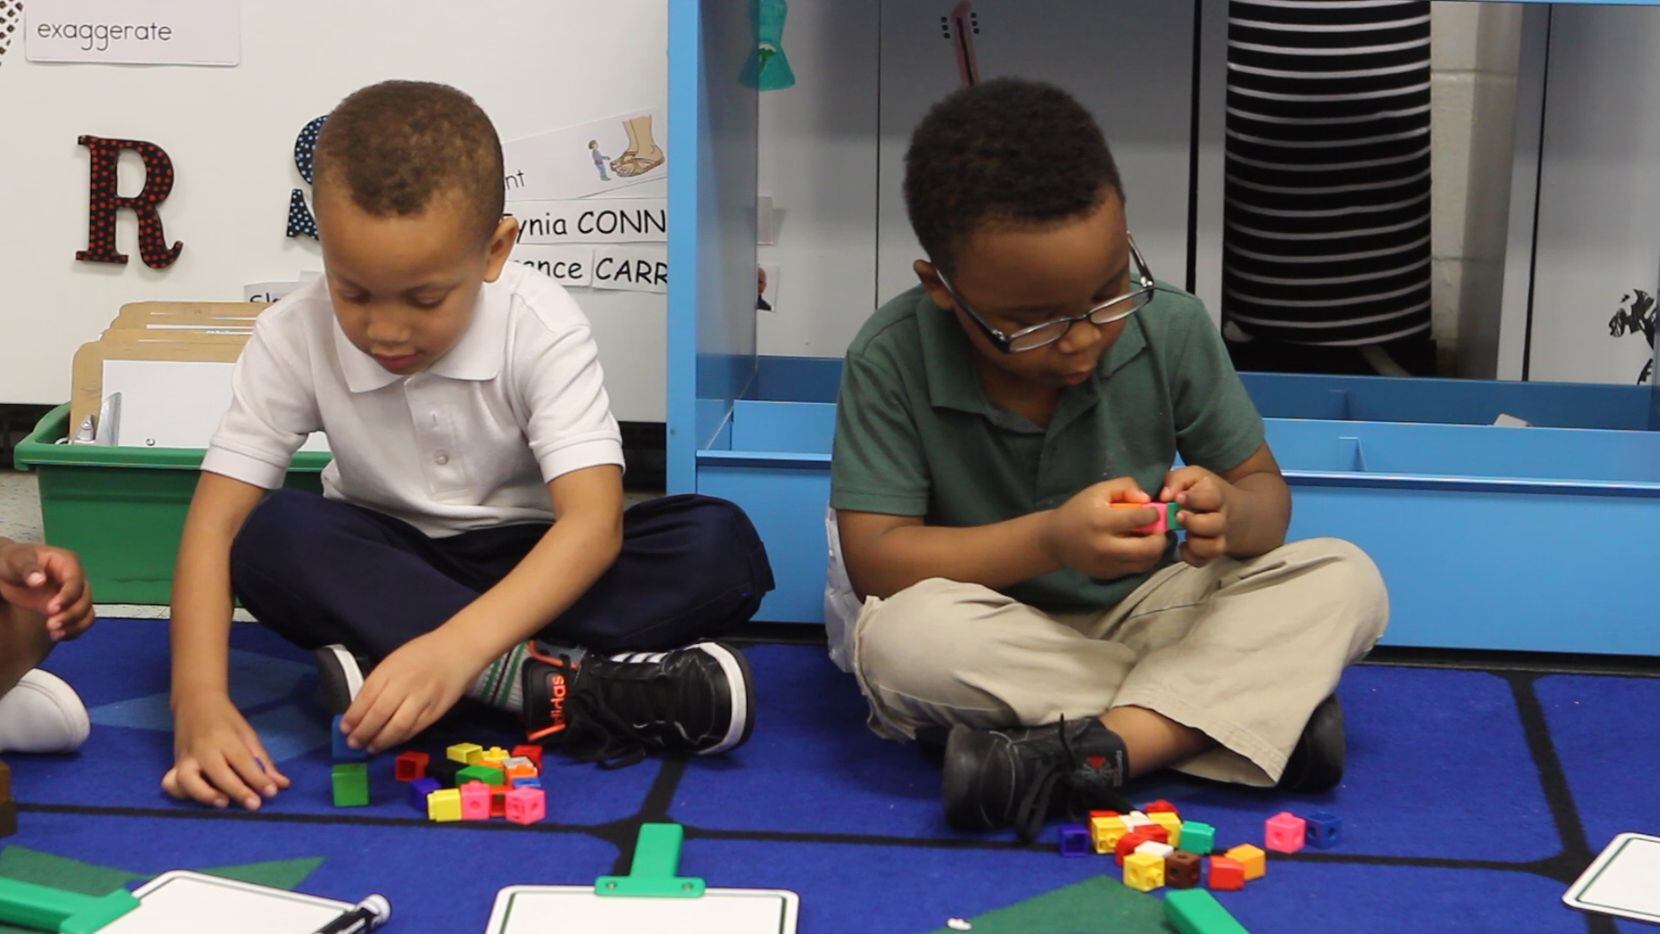 Children learn through play at Harllee Early Childhood Center.